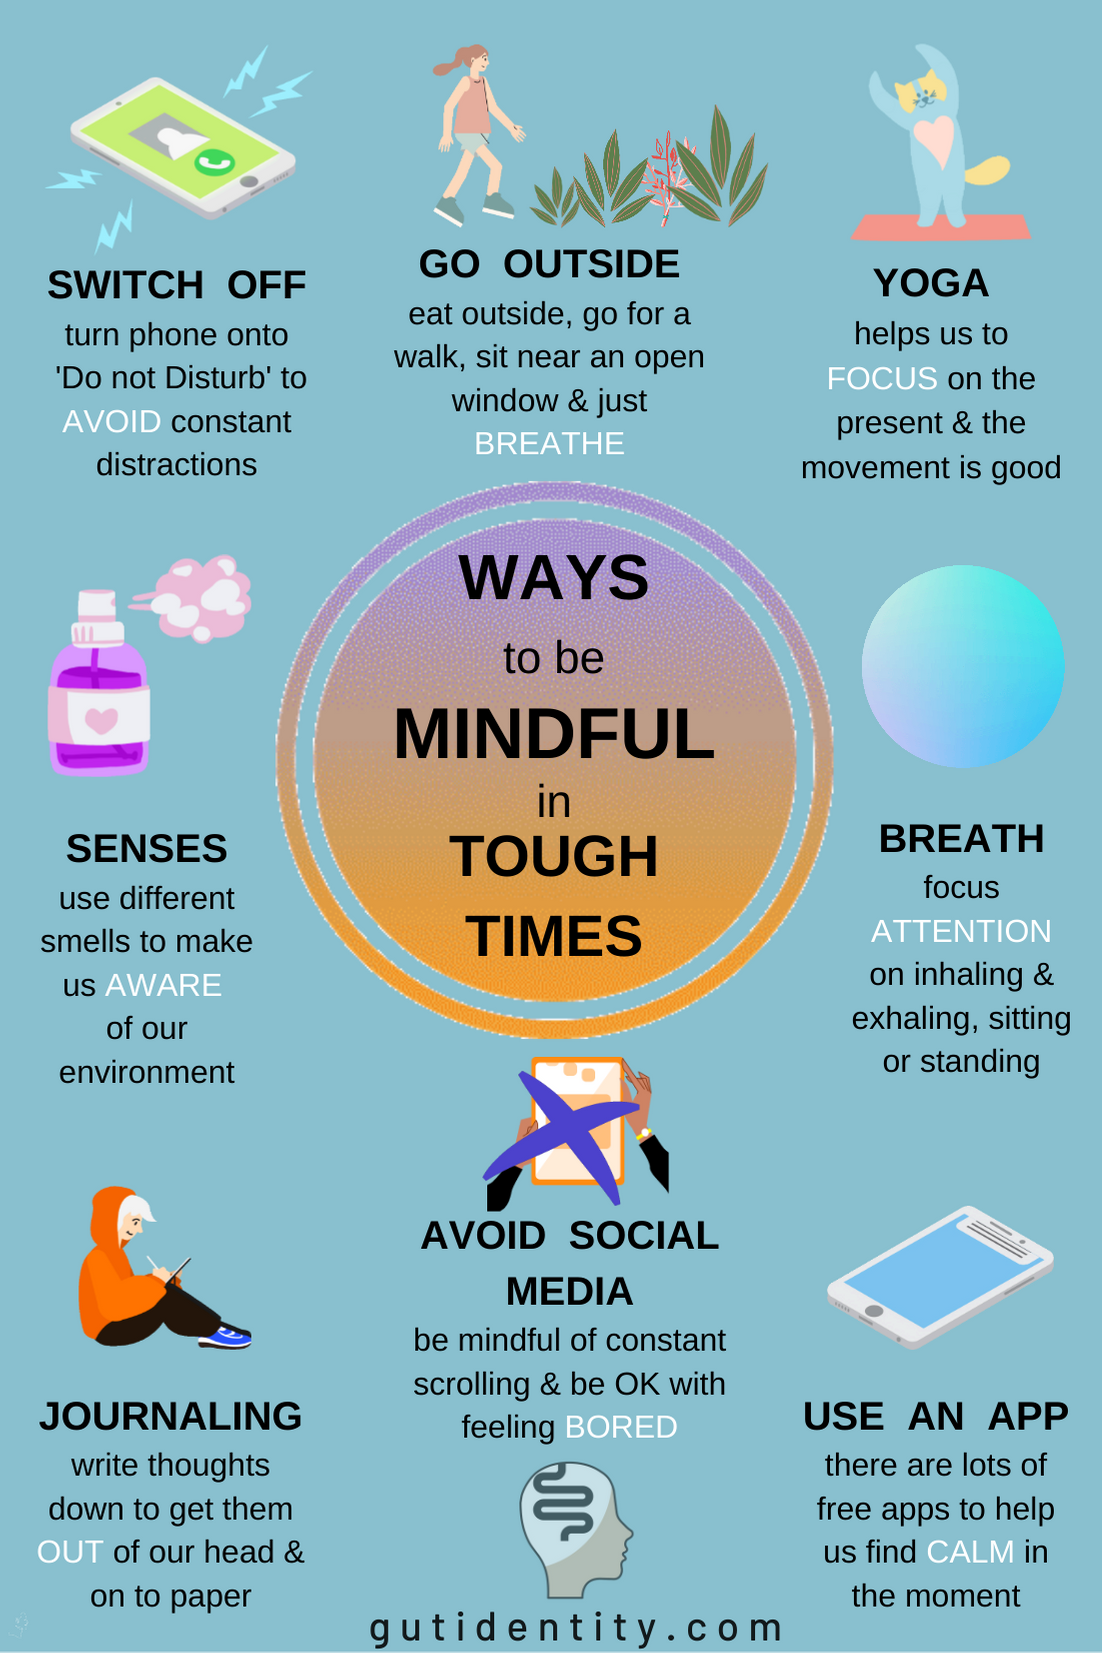 Ways to be Mindful in Tough Times - by Gutidentity